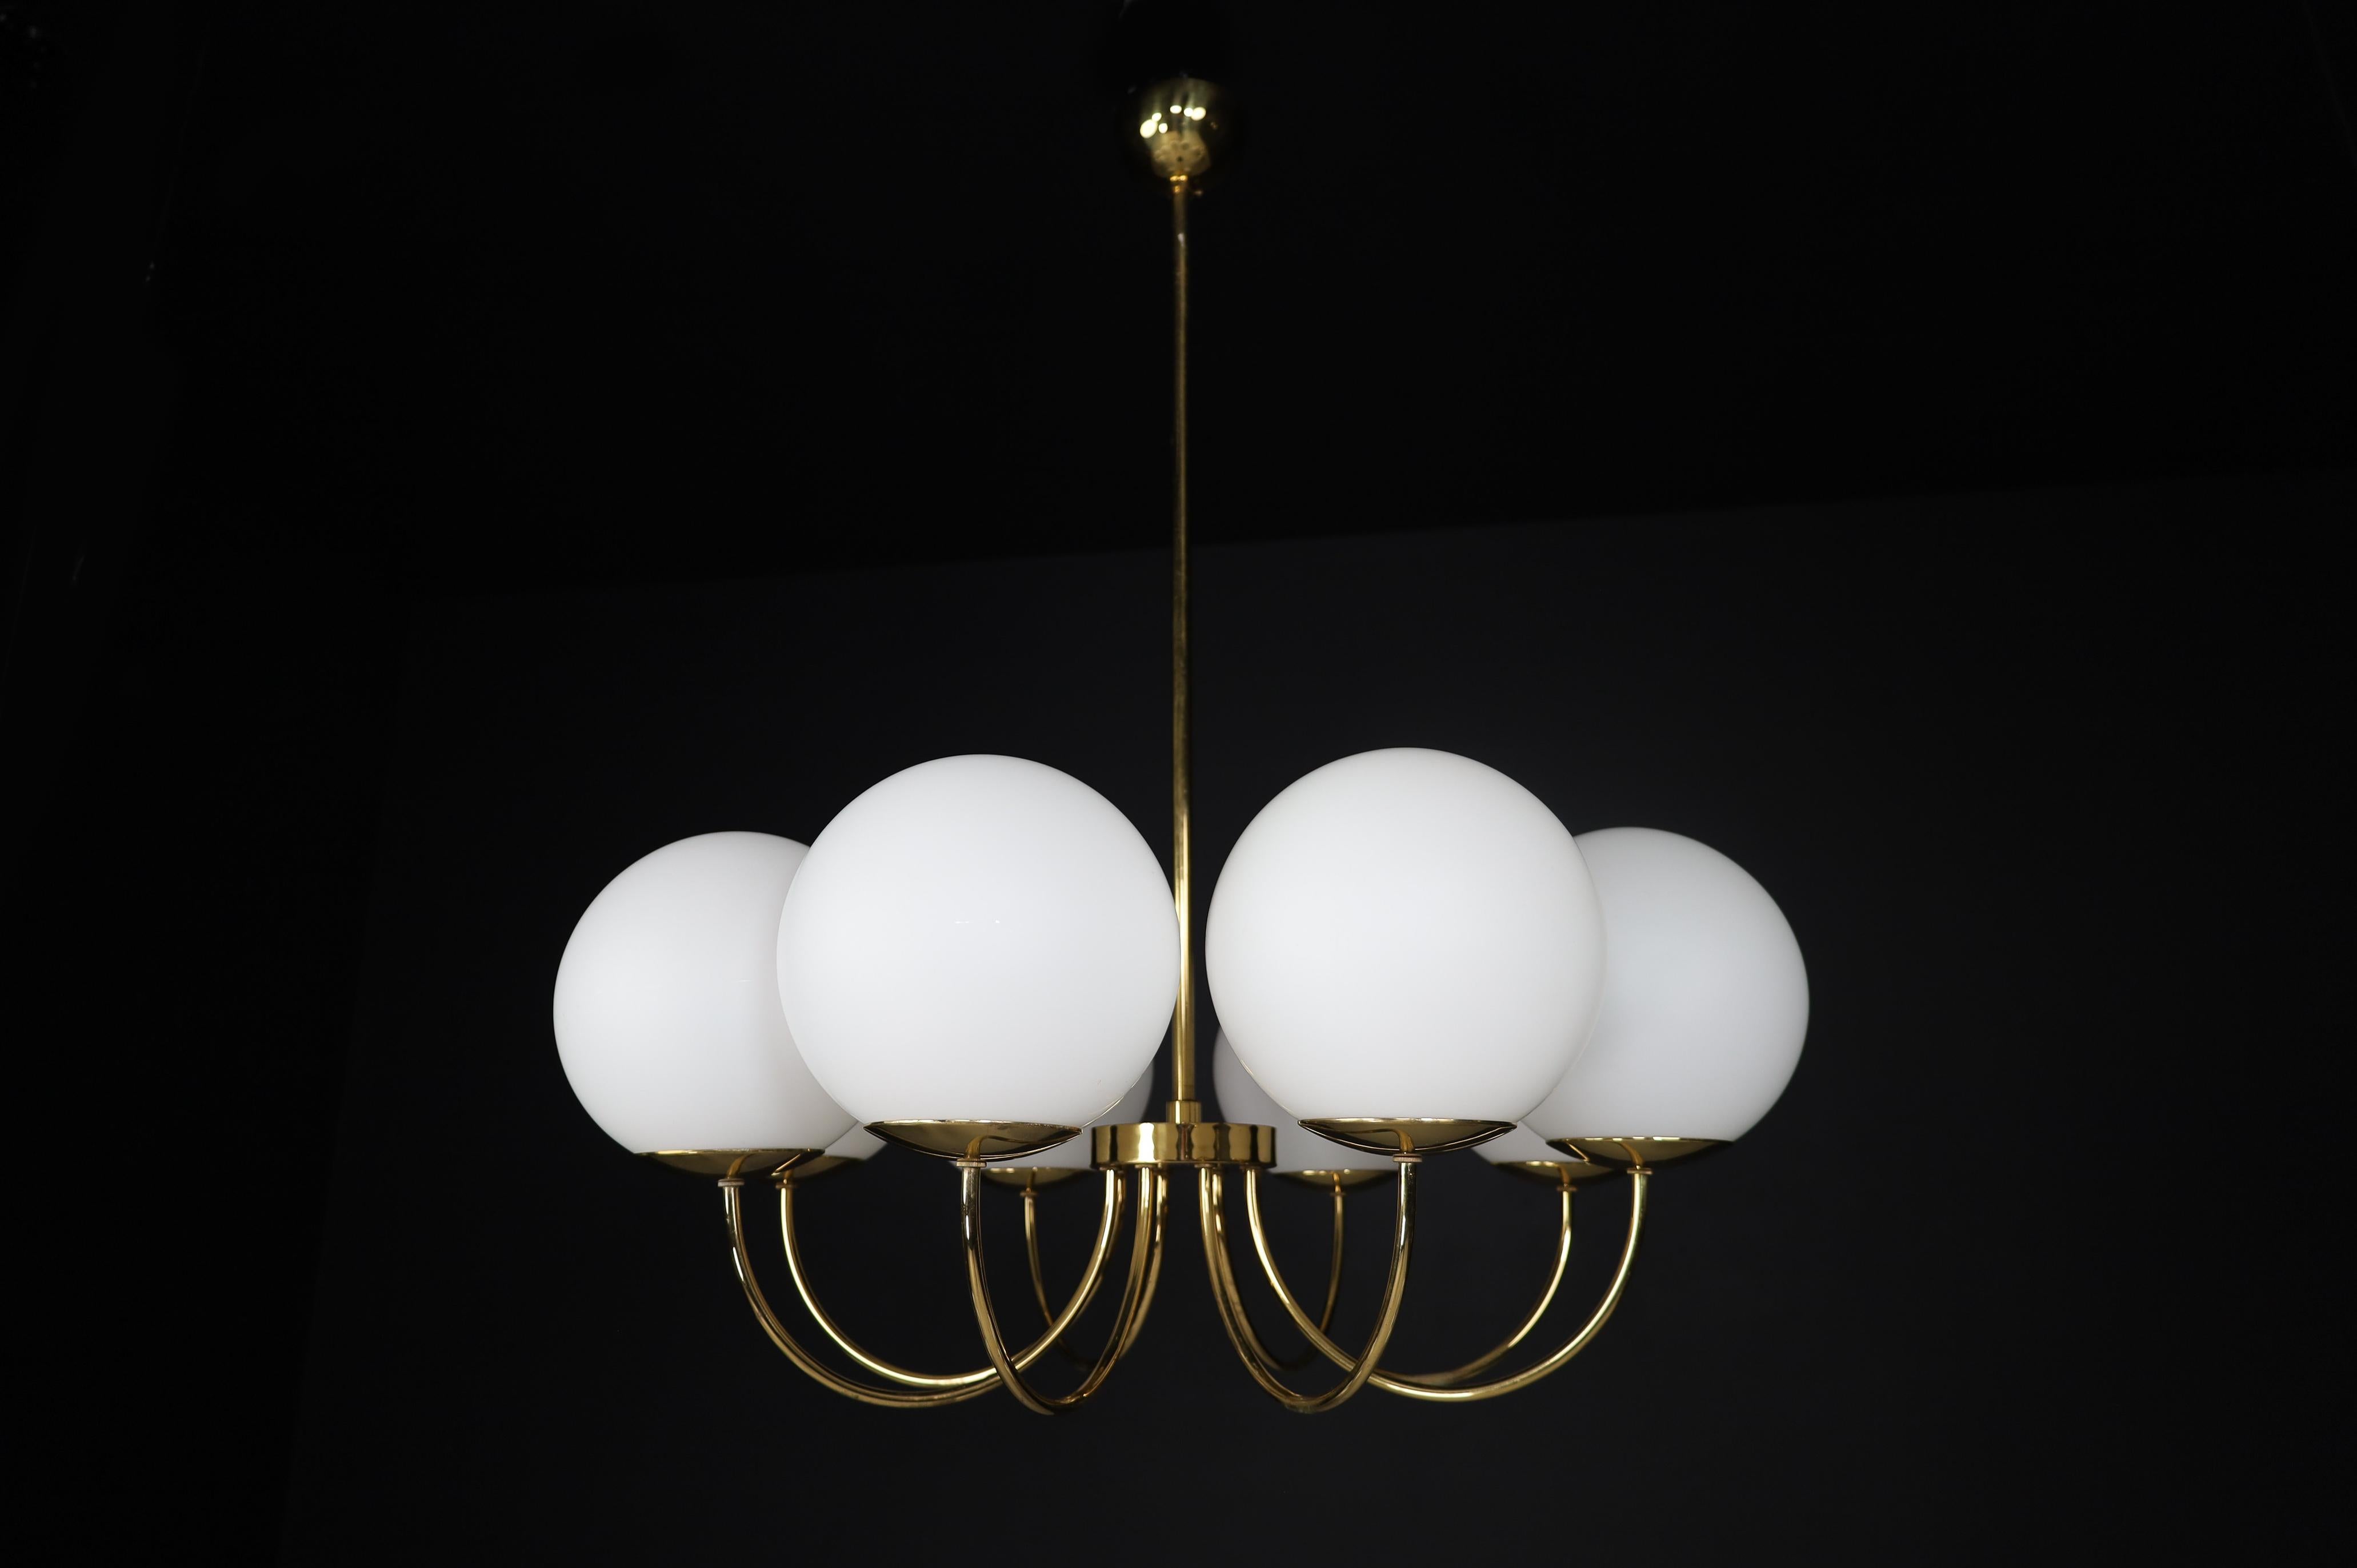 1 of 3 Elegant Chandeliers with Brass Fixture and Opaline Glass Globes, 1960s For Sale 6